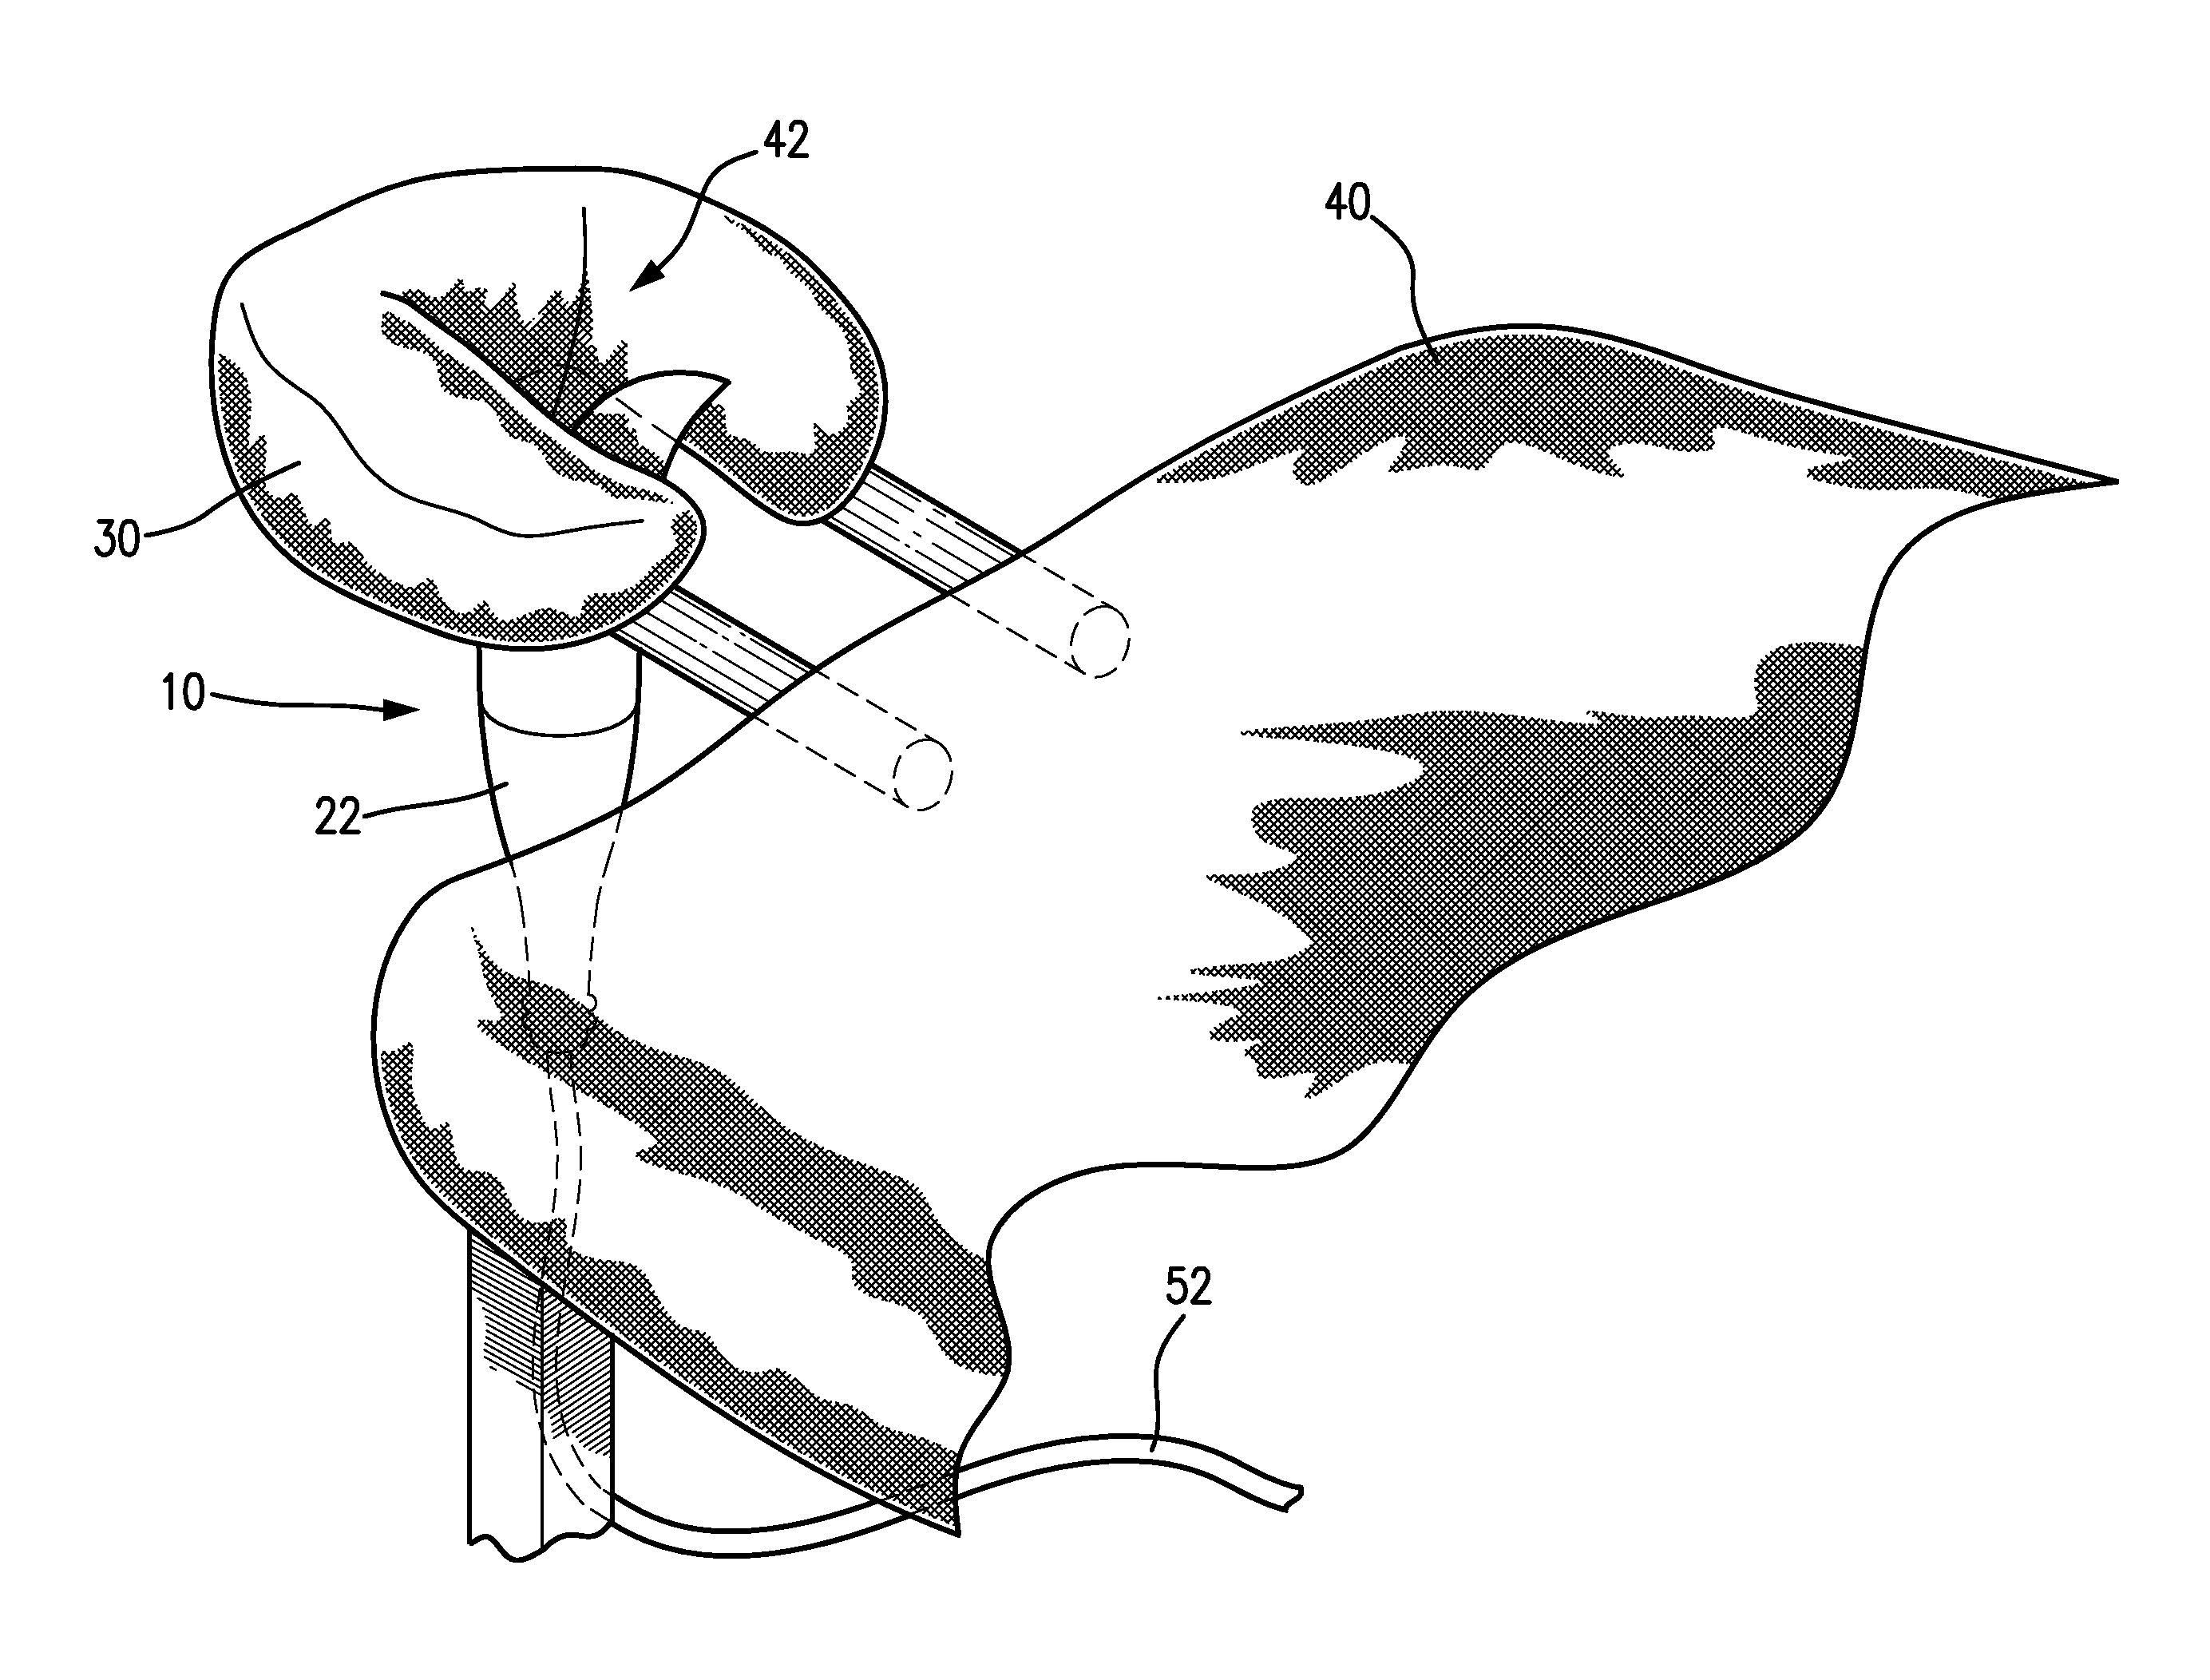 Oxygen and aromatherapy delivery apparatus for a massage table